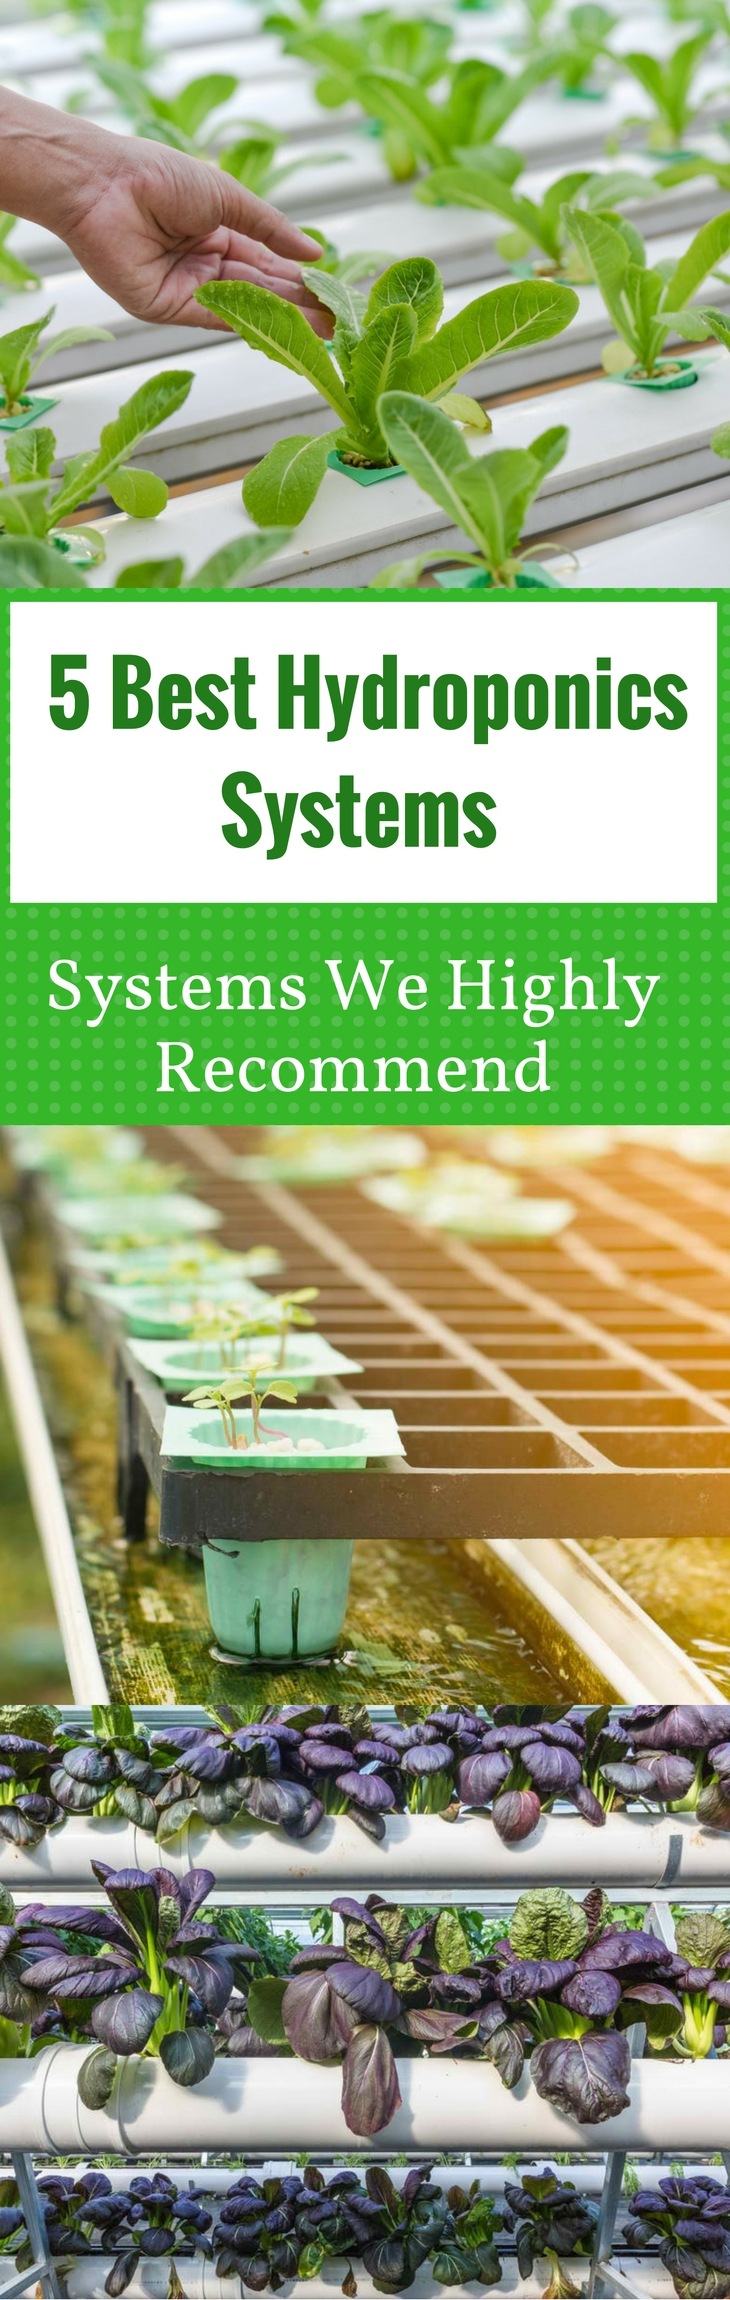 5 Best Hydroponics Systems We Highly Recommend pin it